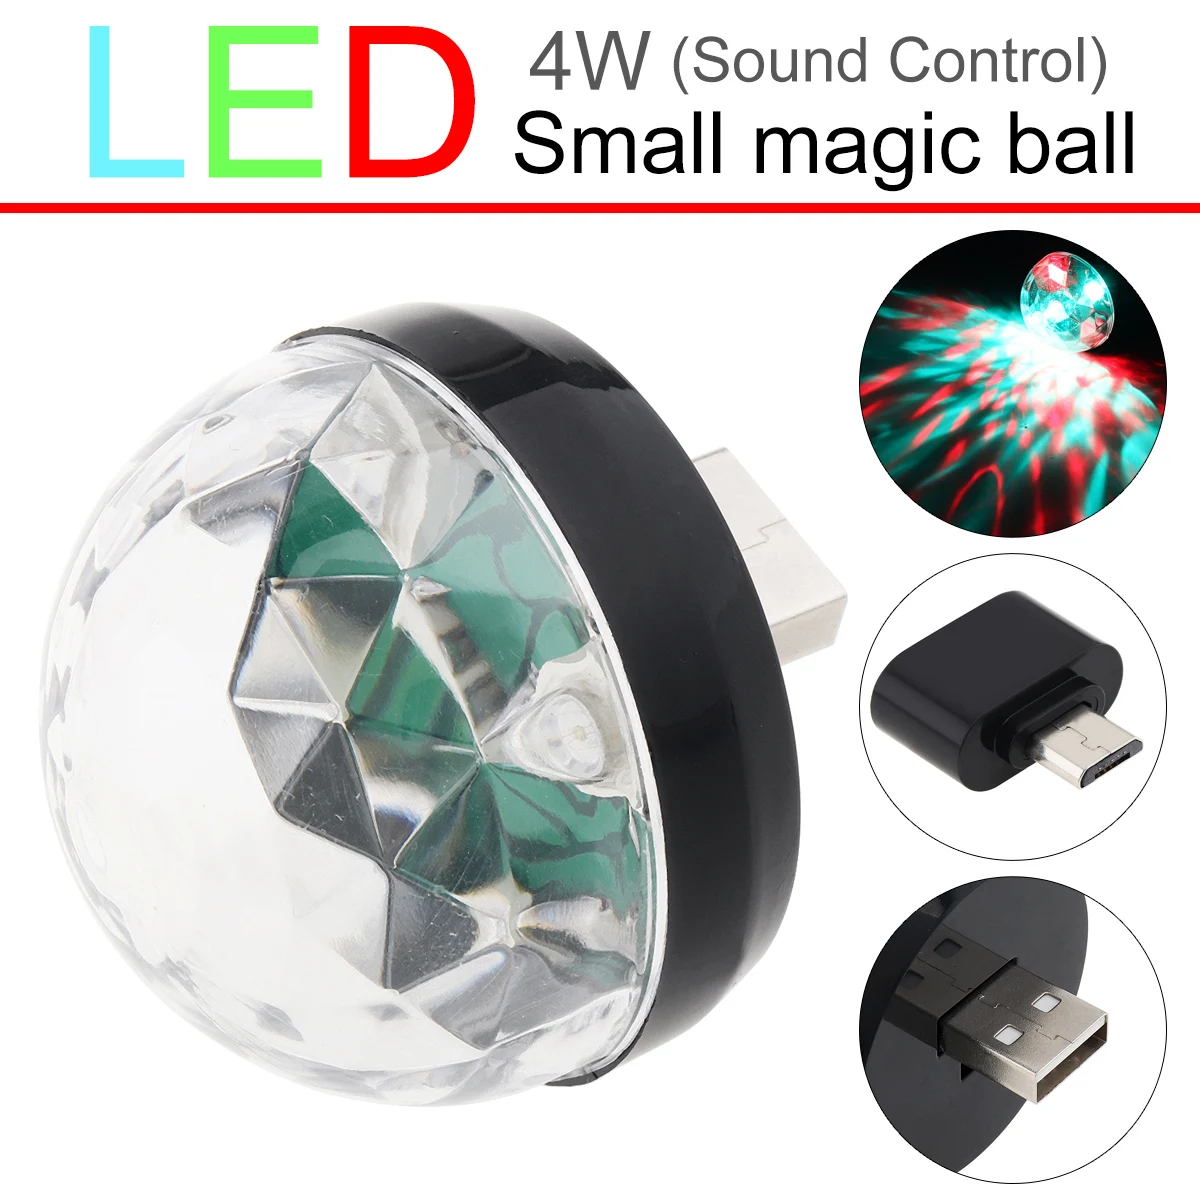 4W Mini USB LED Sound Active Party Light Crystal Magic Ball RGB Colorful Stage Light Support for Andriod Phone for Home Car KTV